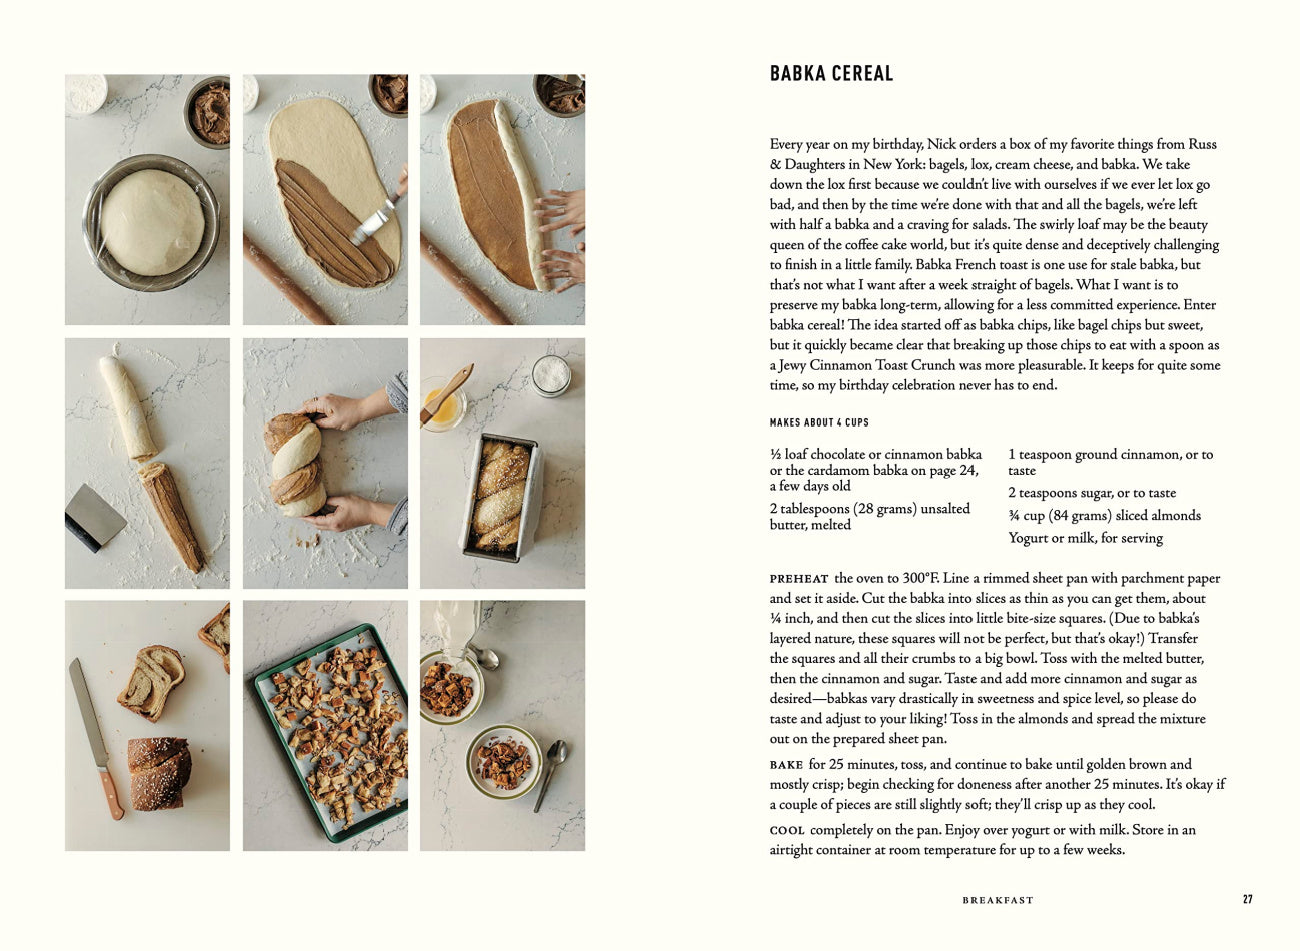 Home is Where the Eggs Are / MOLLY YEH